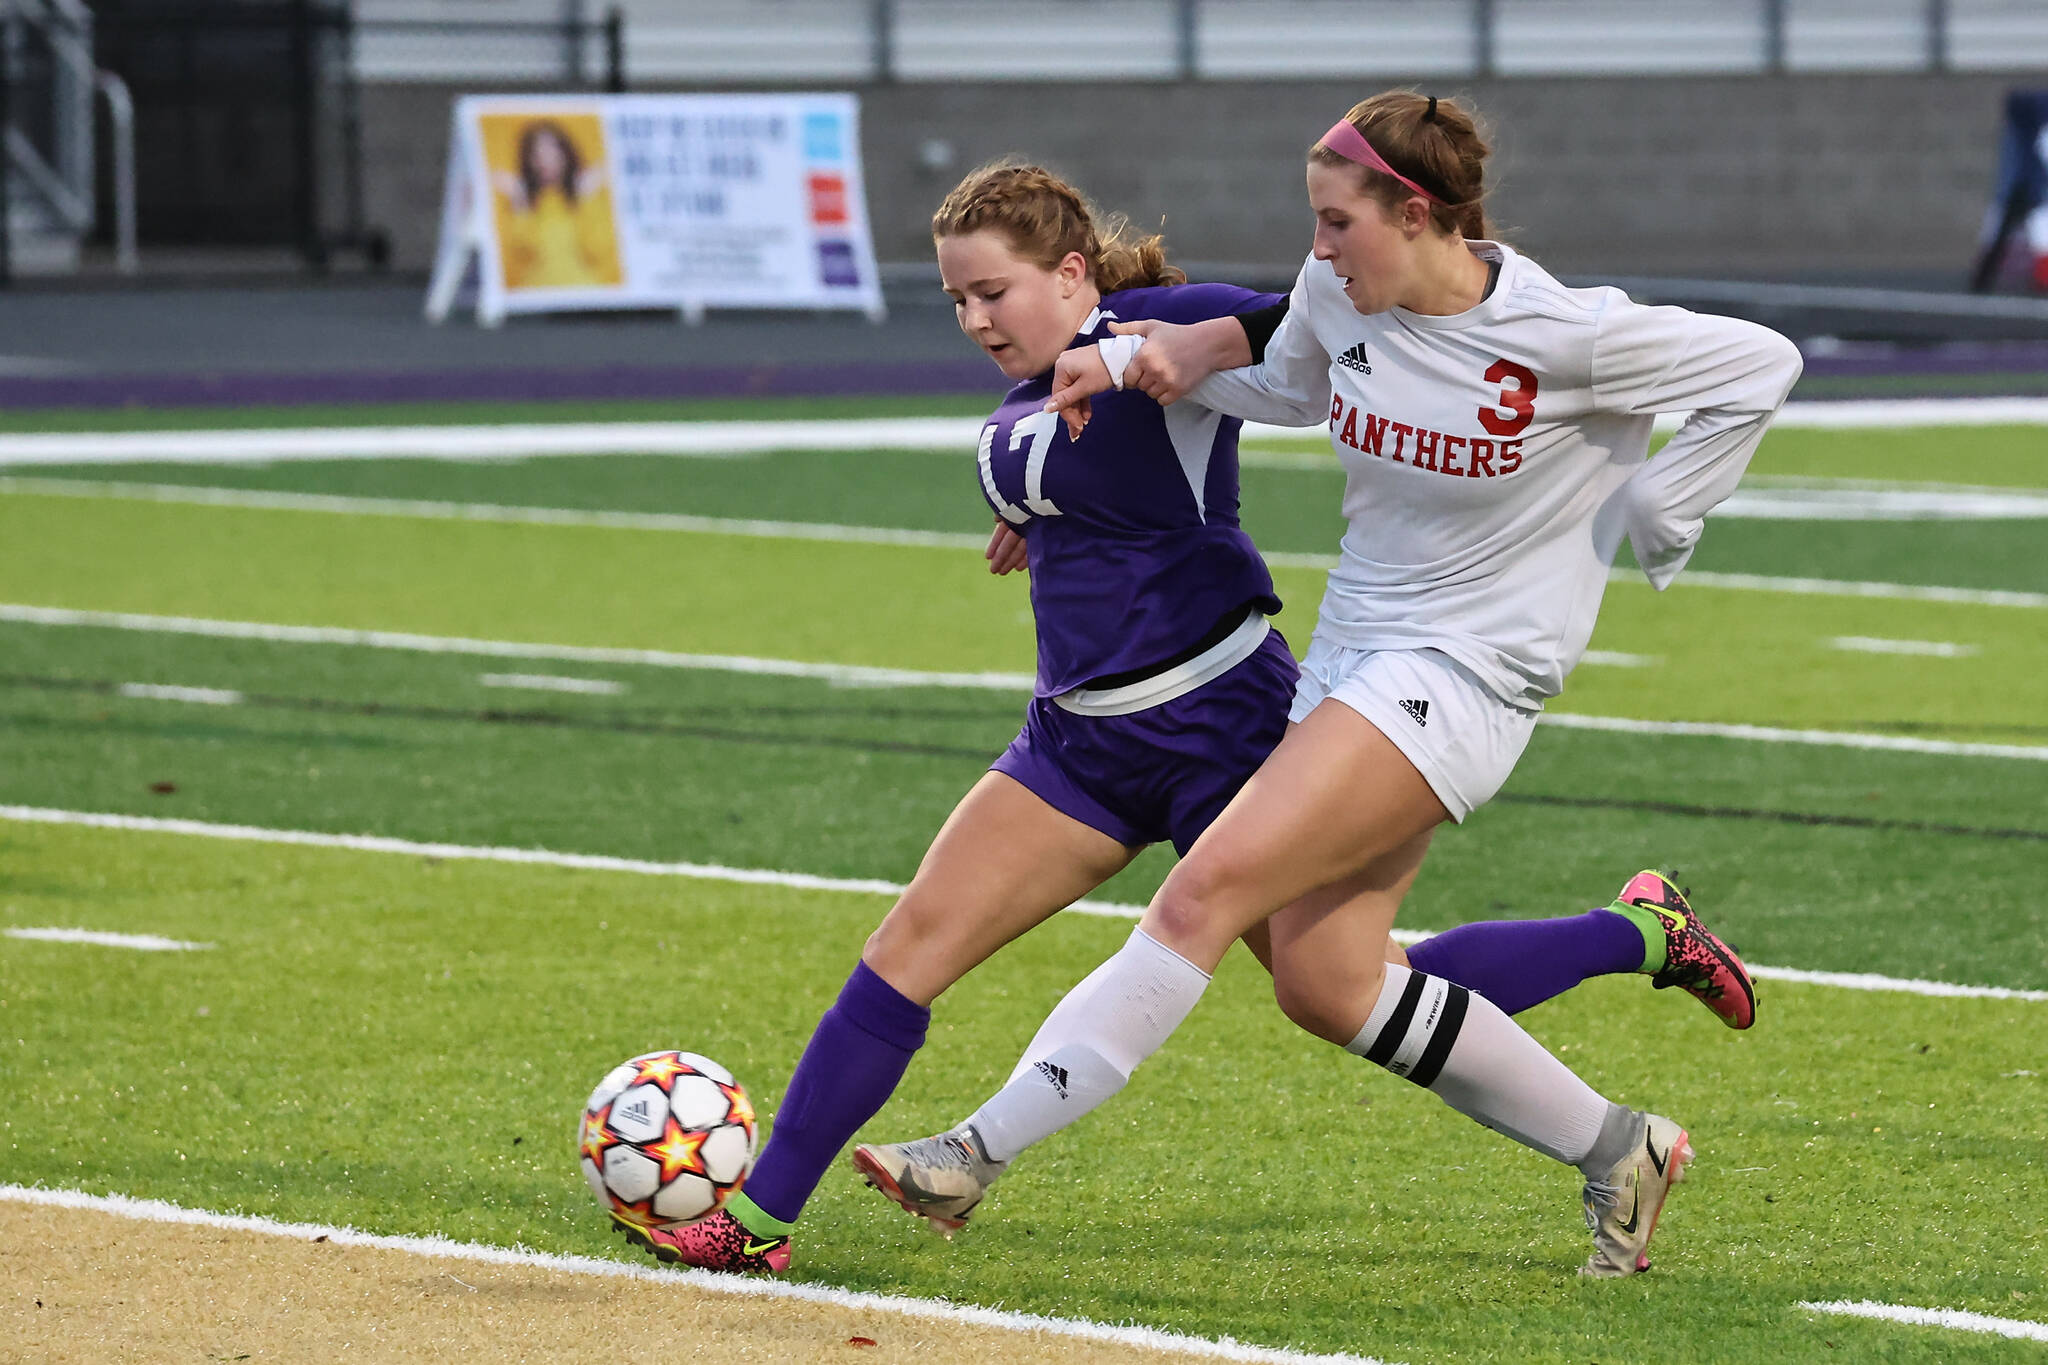 Junior Anna Suto races for the ball in a playoff game against Snohomish Oct. 29. (Photo by John Fisken)